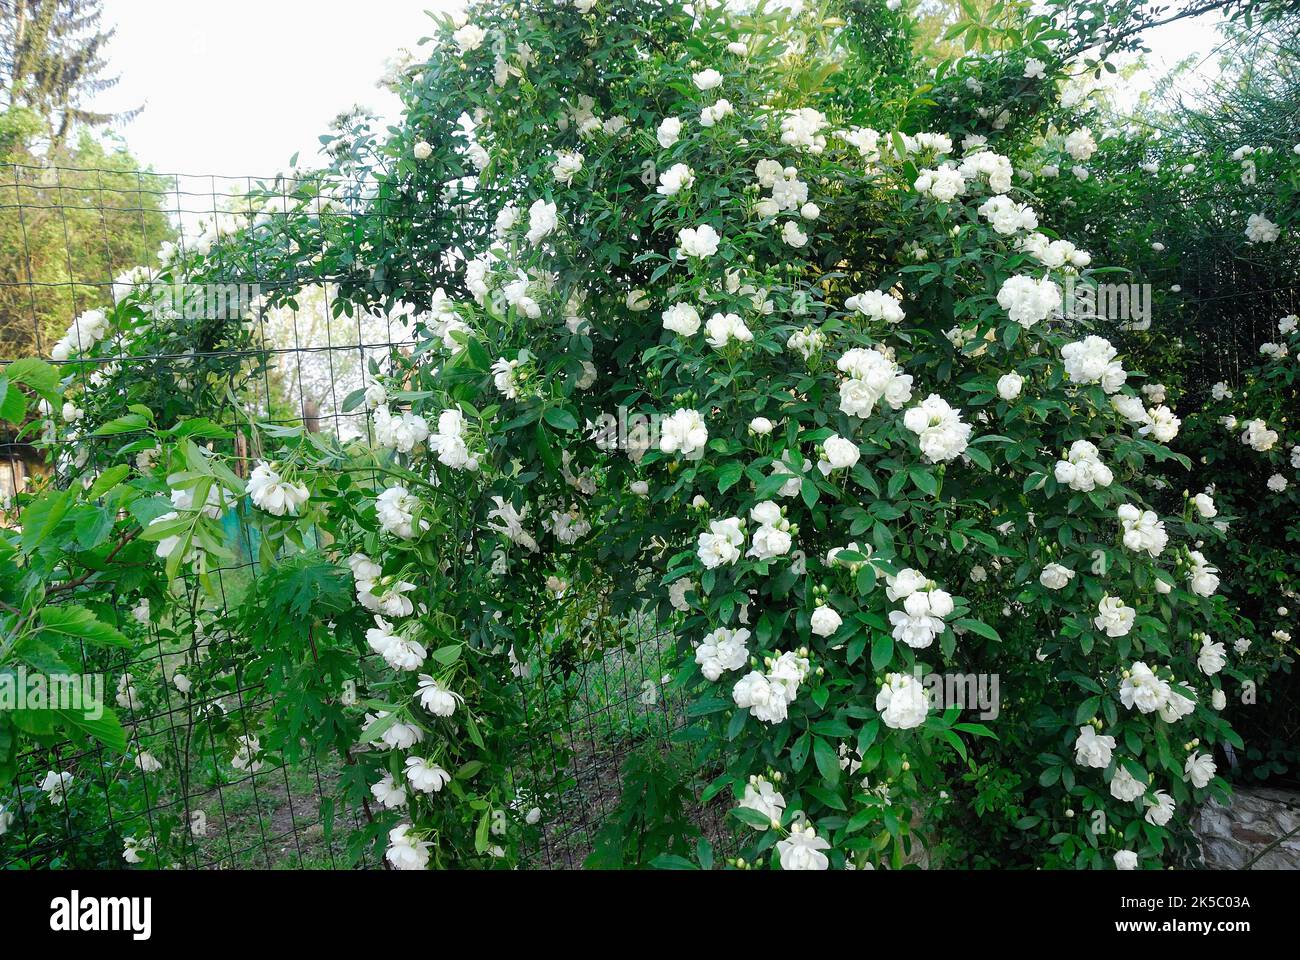 Rosa Banksiae Alba Plena is an old white rose. It was discovered in 1807 by William Kerr in a garden of Canton .Rose bush. Stock Photo